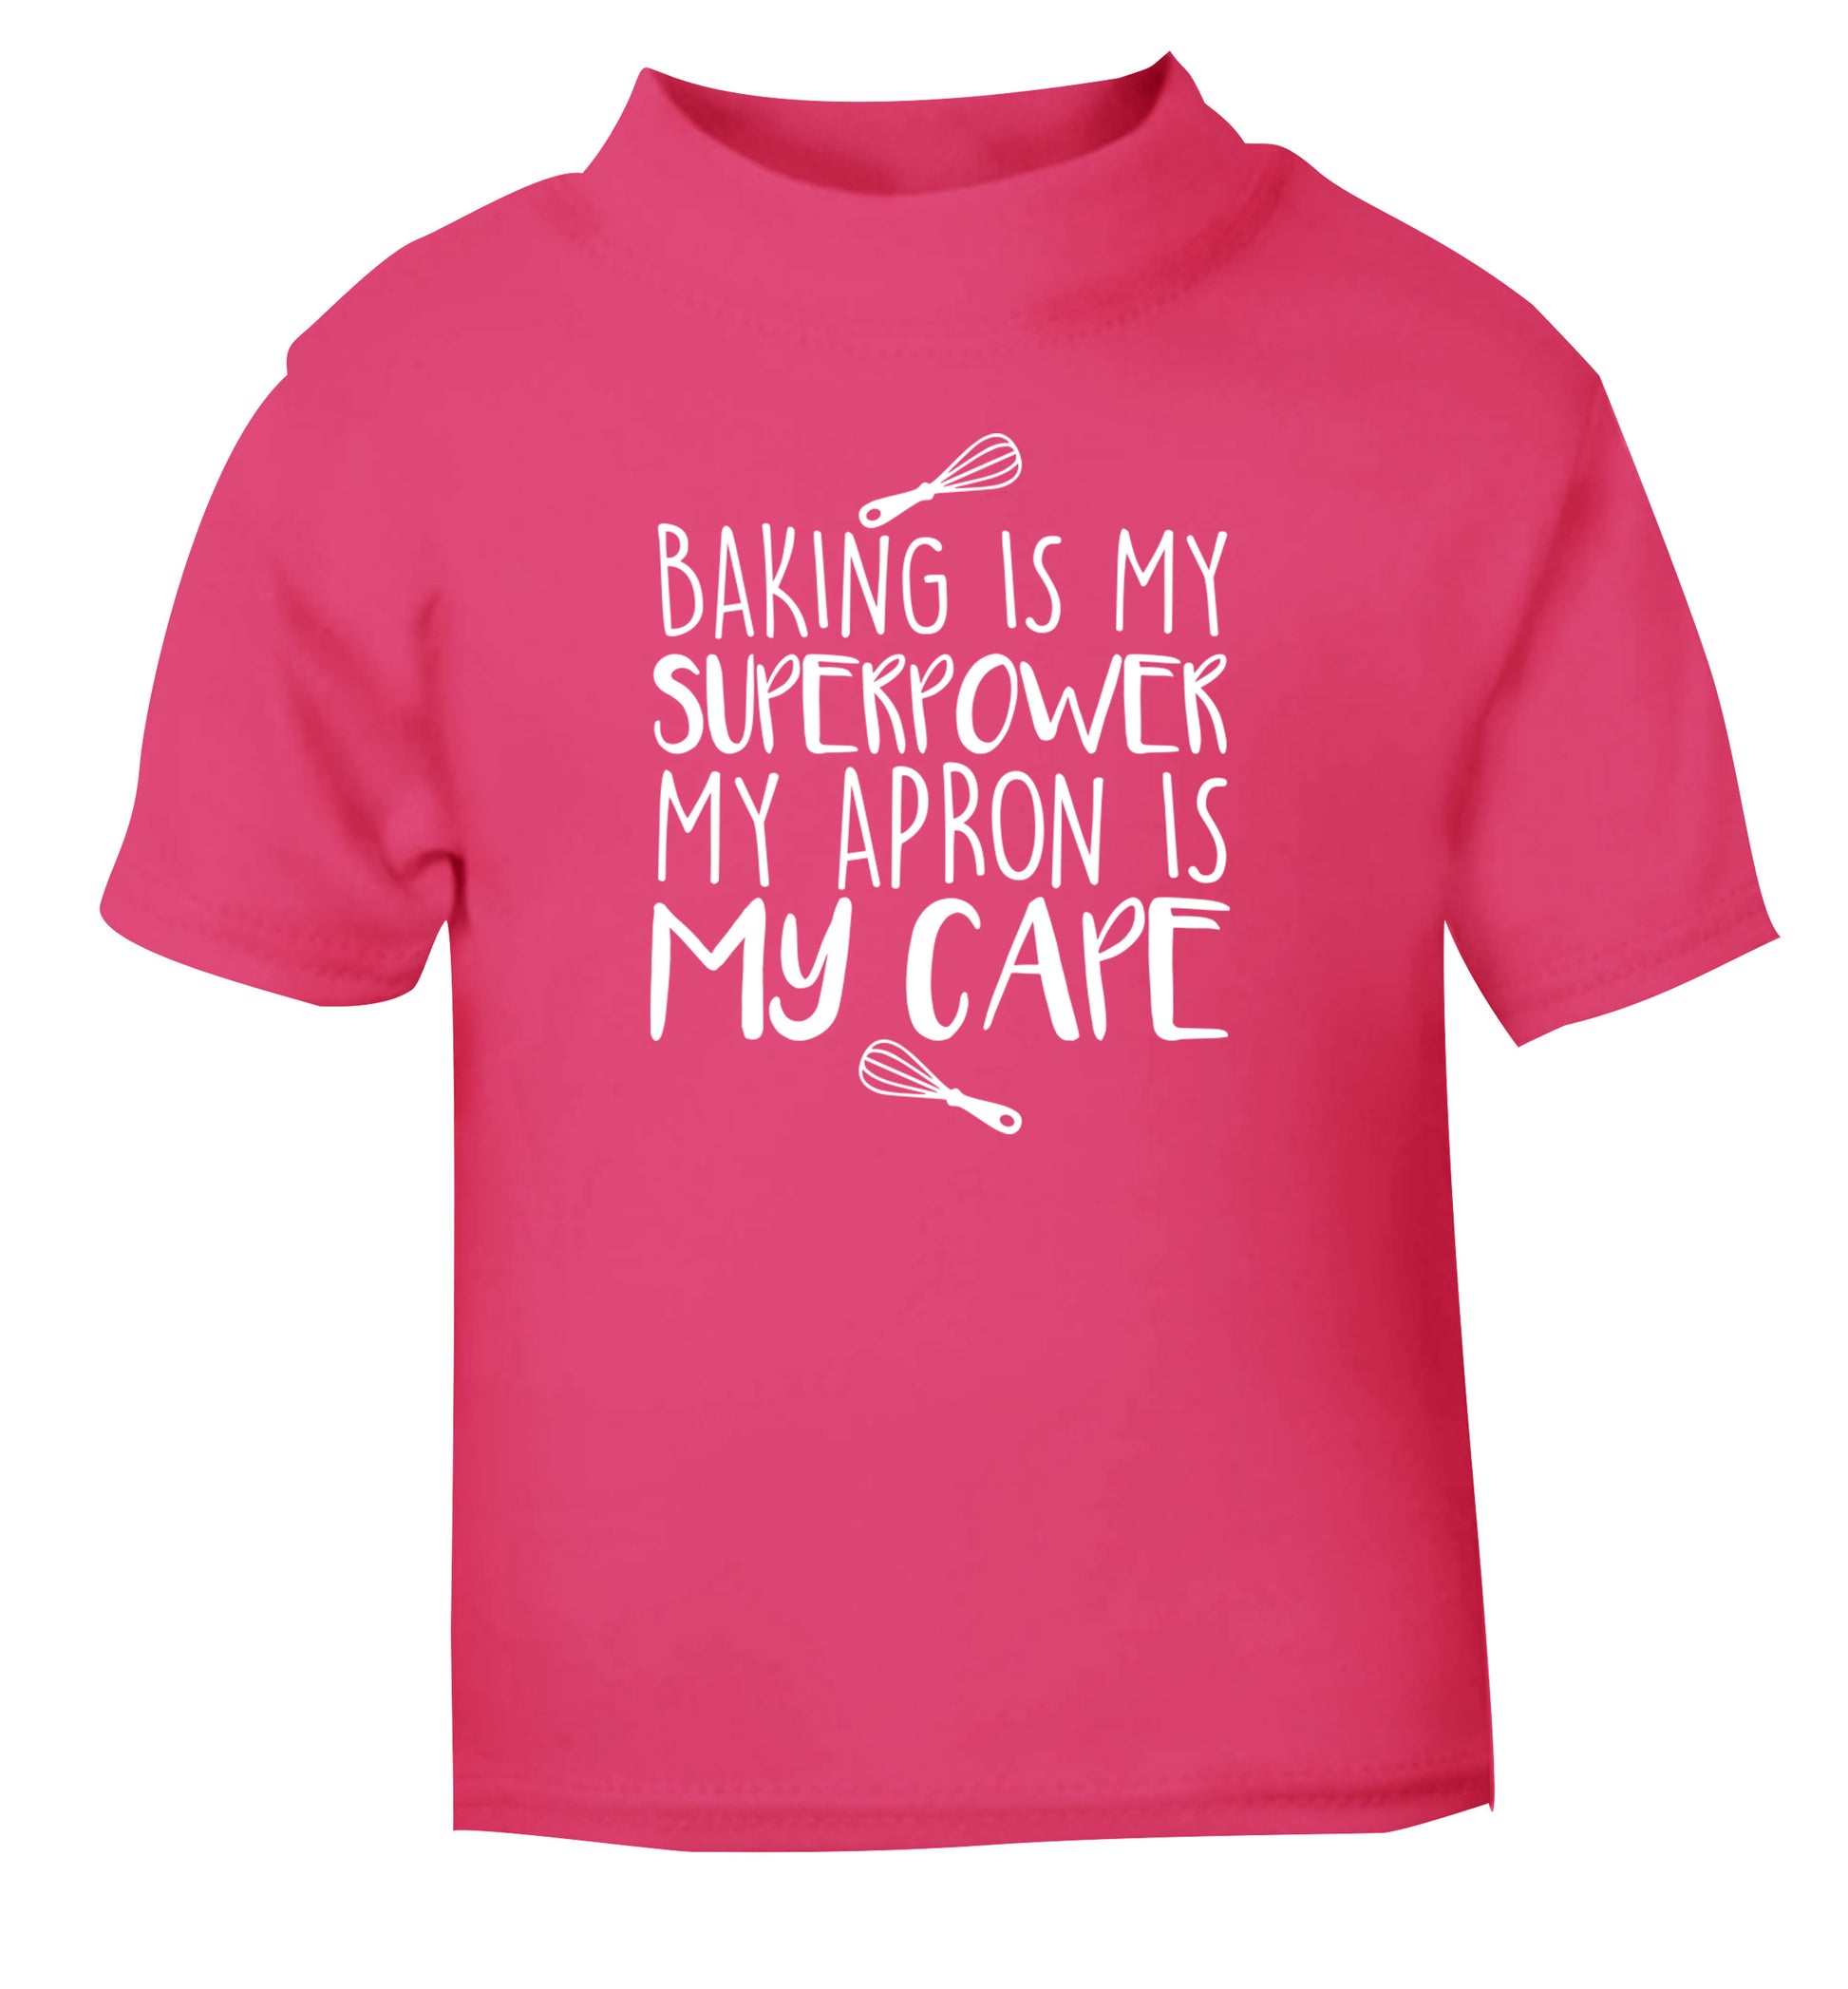 Baking is my superpower my apron is my cape pink Baby Toddler Tshirt 2 Years